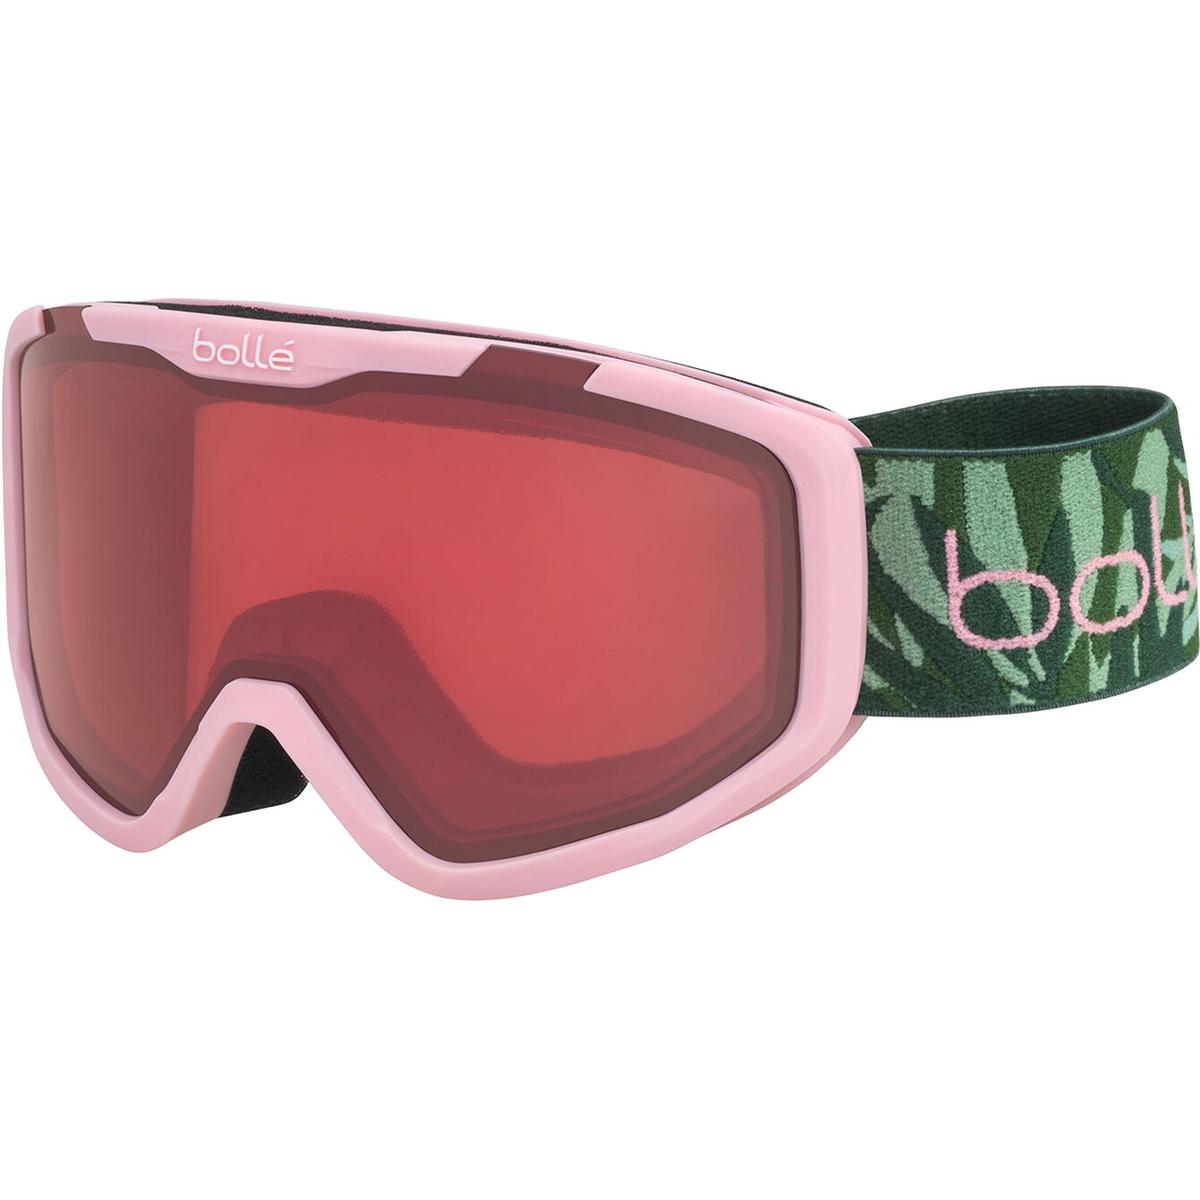 Bolle Rocket Kid's Youth Goggles